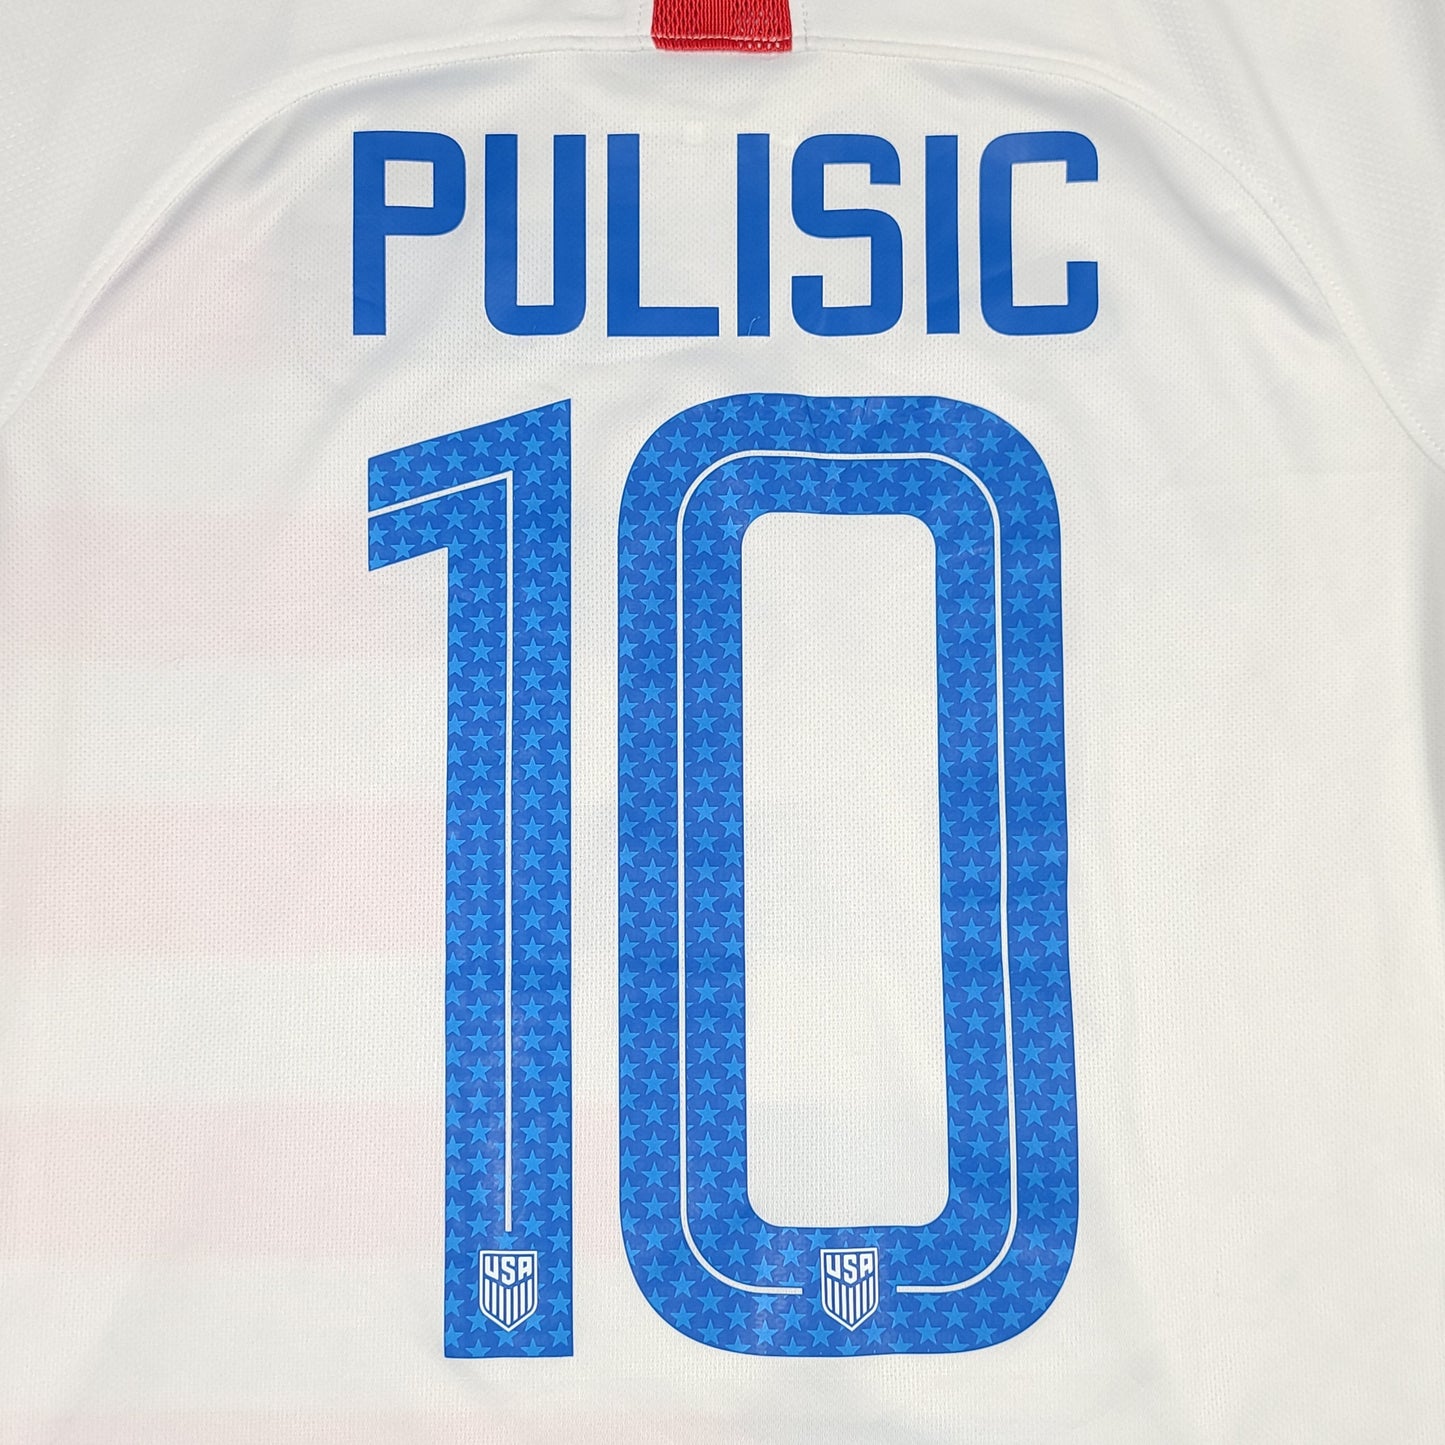 Christian Pulisic Team USA 2018 Youth Home Soccer Jersey